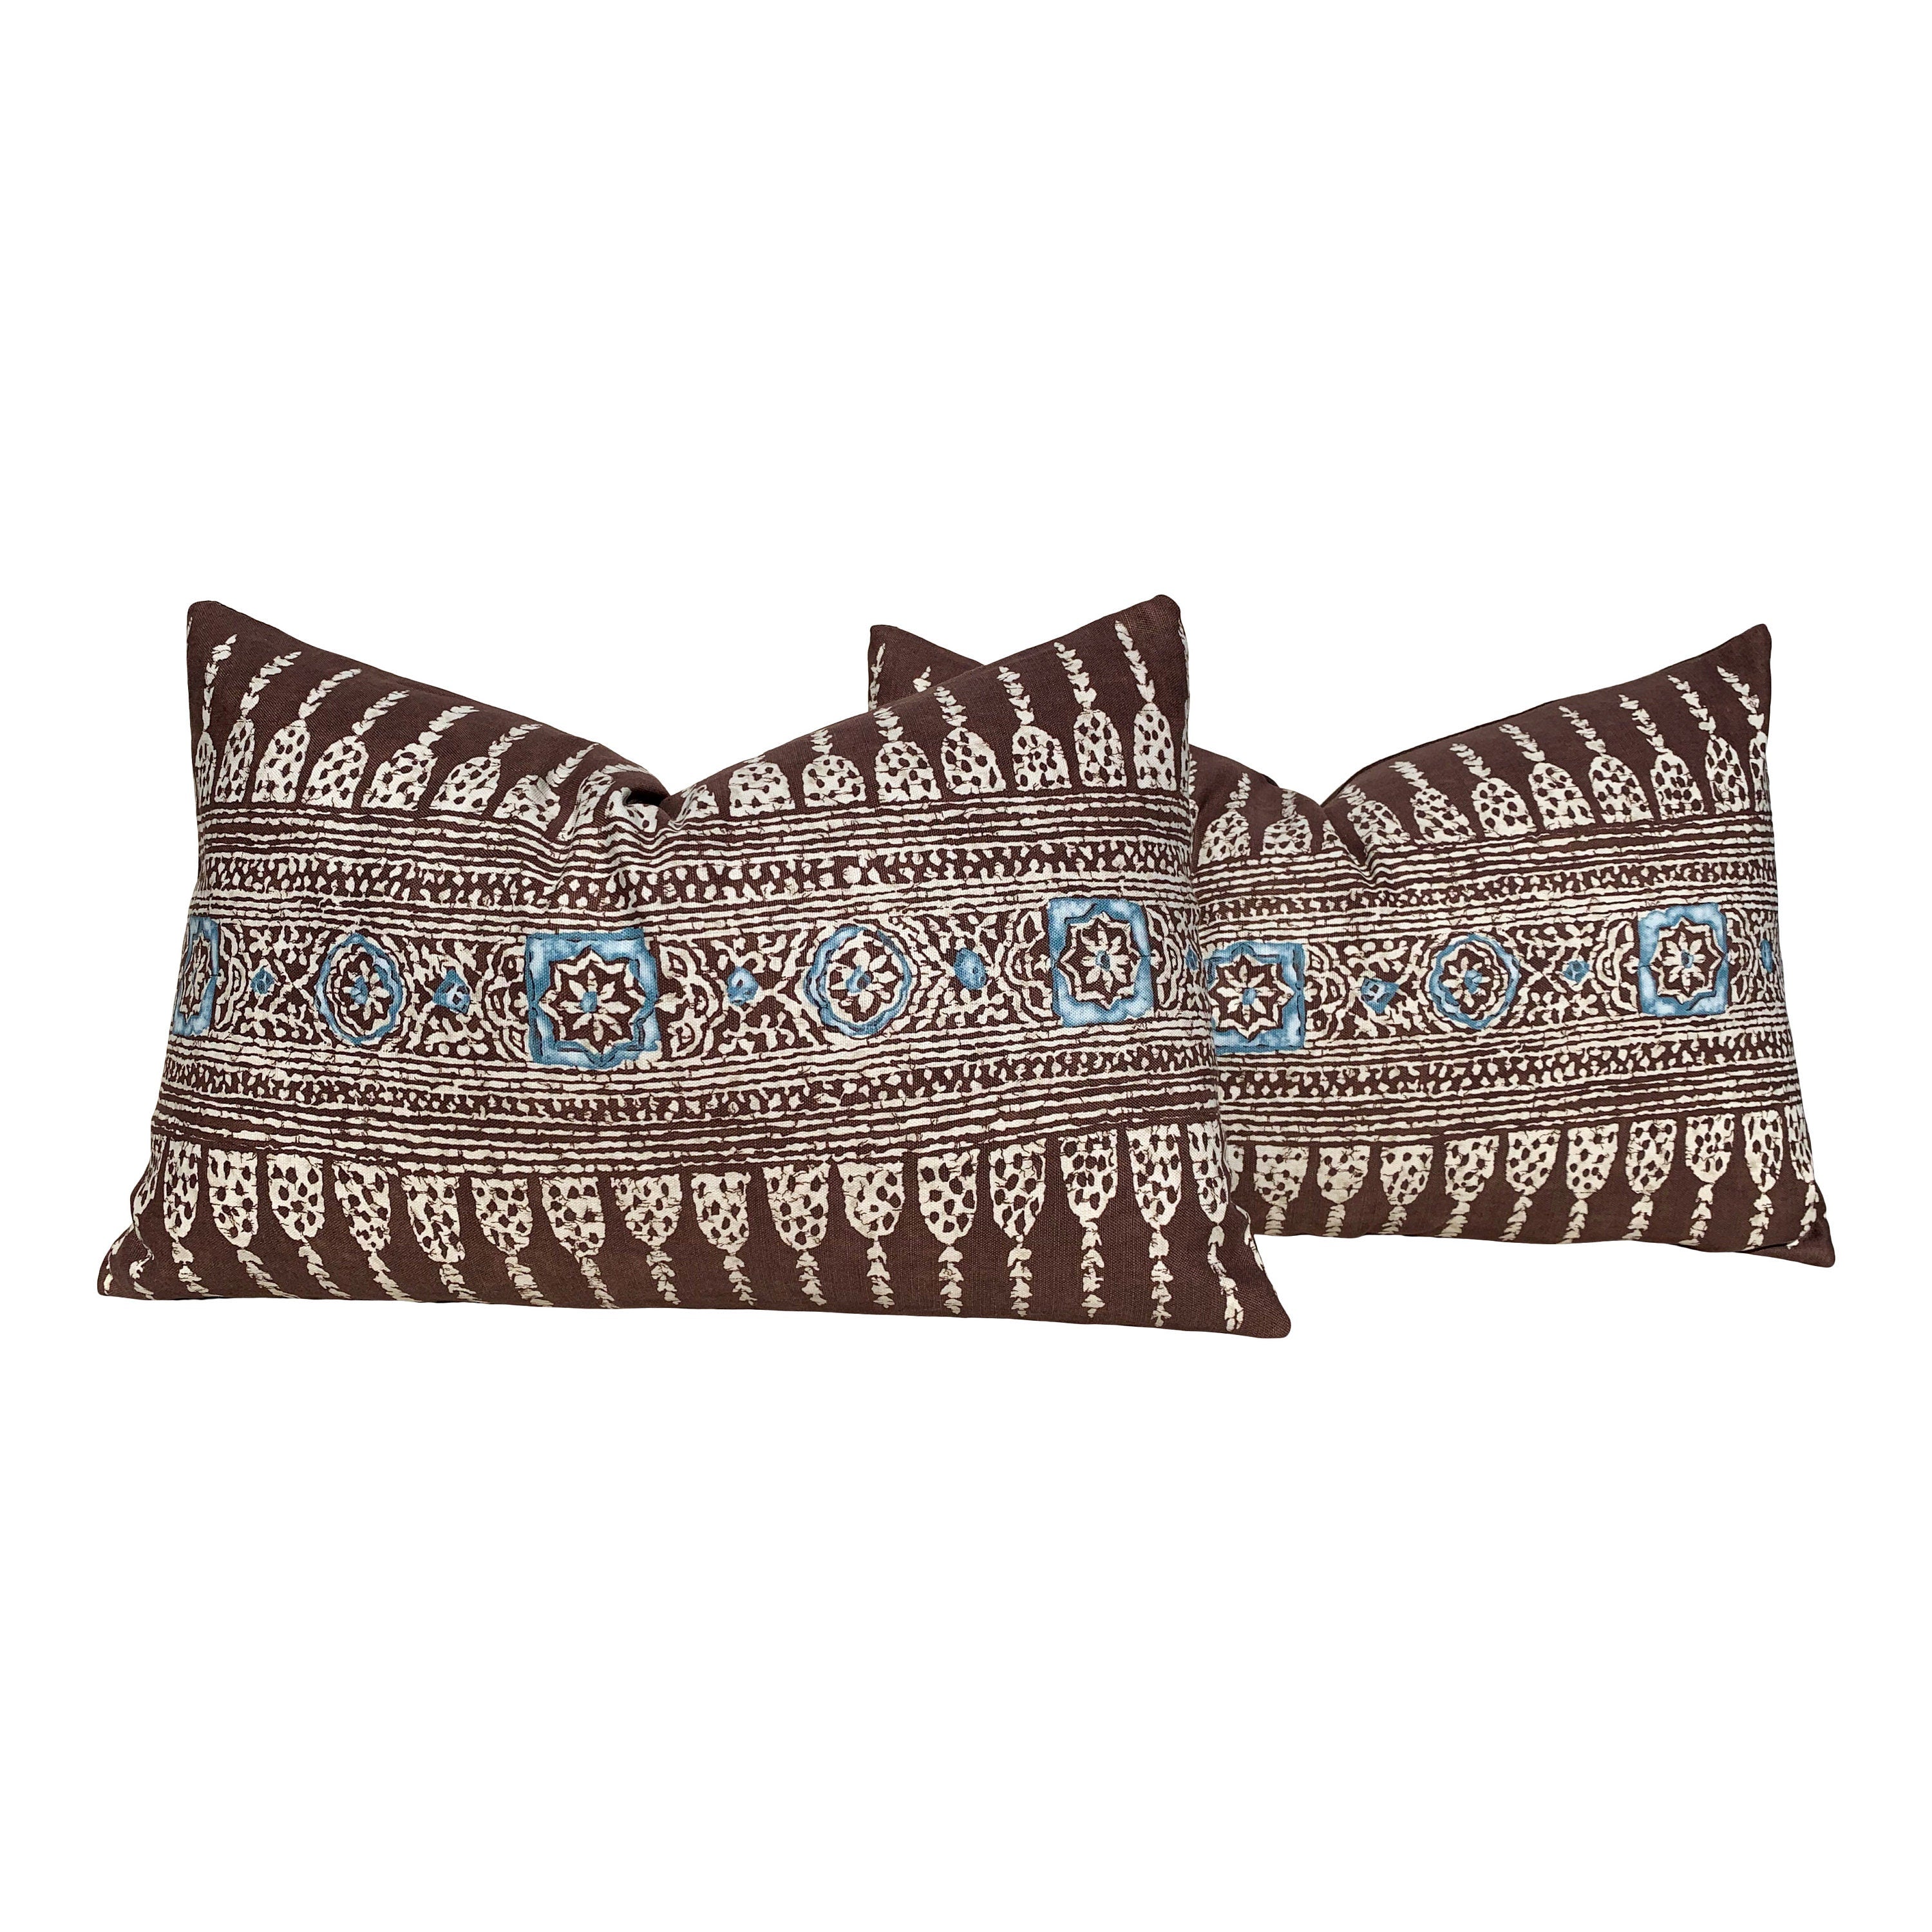 Thibaut Javanese Stripe Pillow in Chocolate Brown and Blue. Decorative Pillow// Accent Throw pillow// Designer pillows// high end cushion